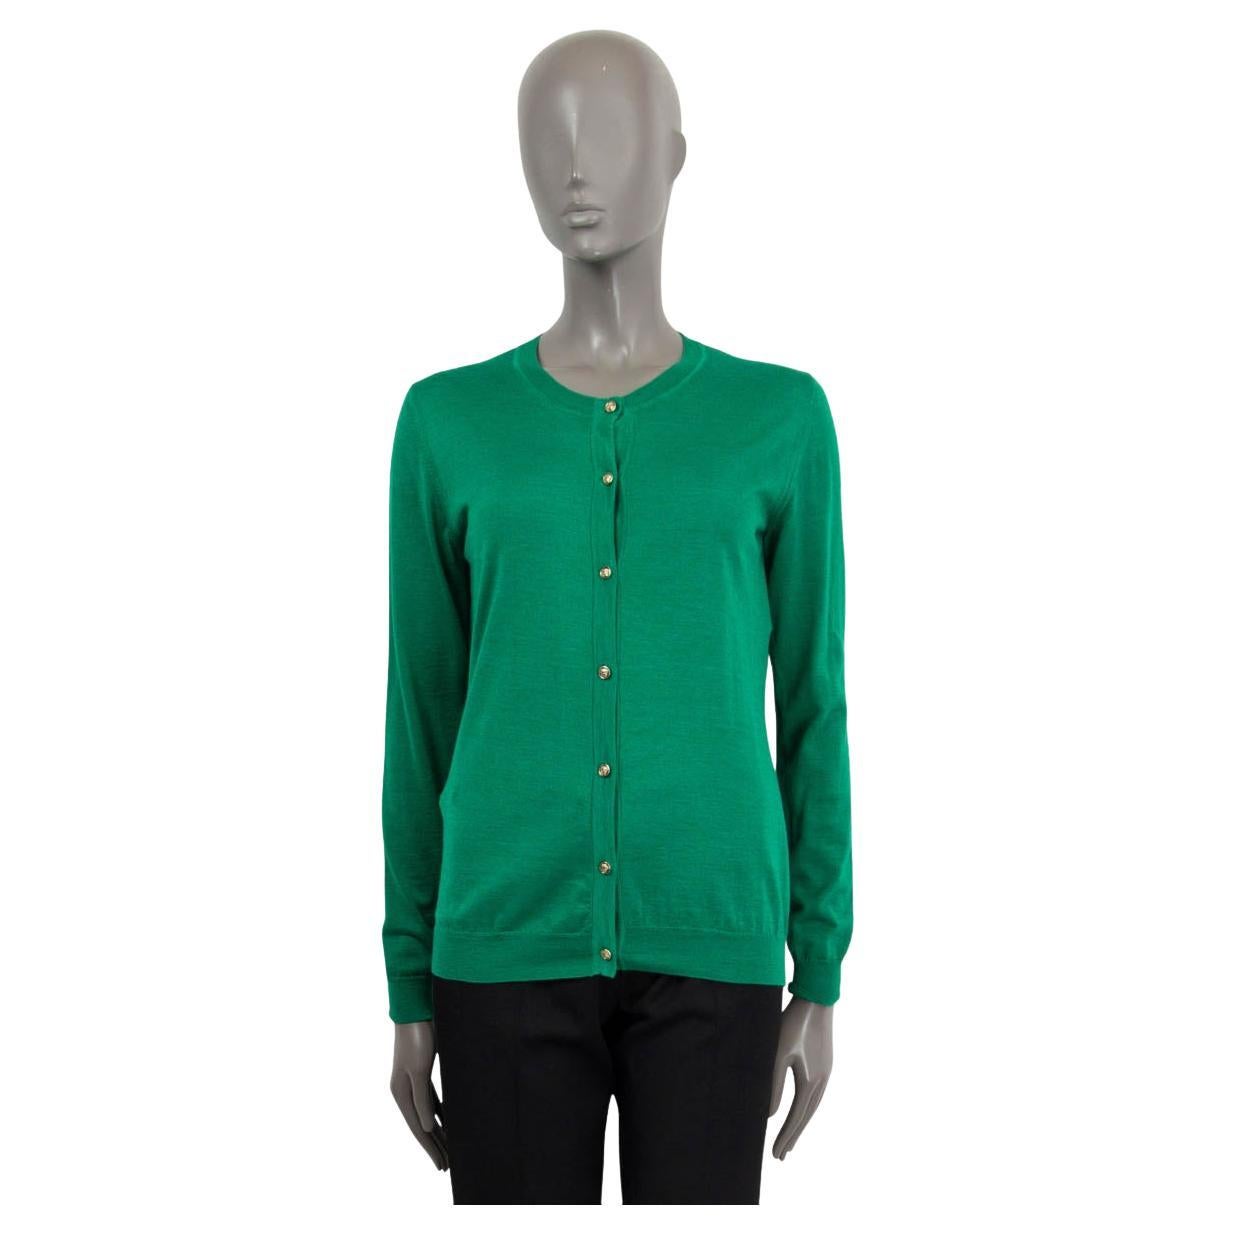 VERSACE green cashmere & silk BUTTON FRONT CREWNECK Cardigan Sweater 44 L For Sale